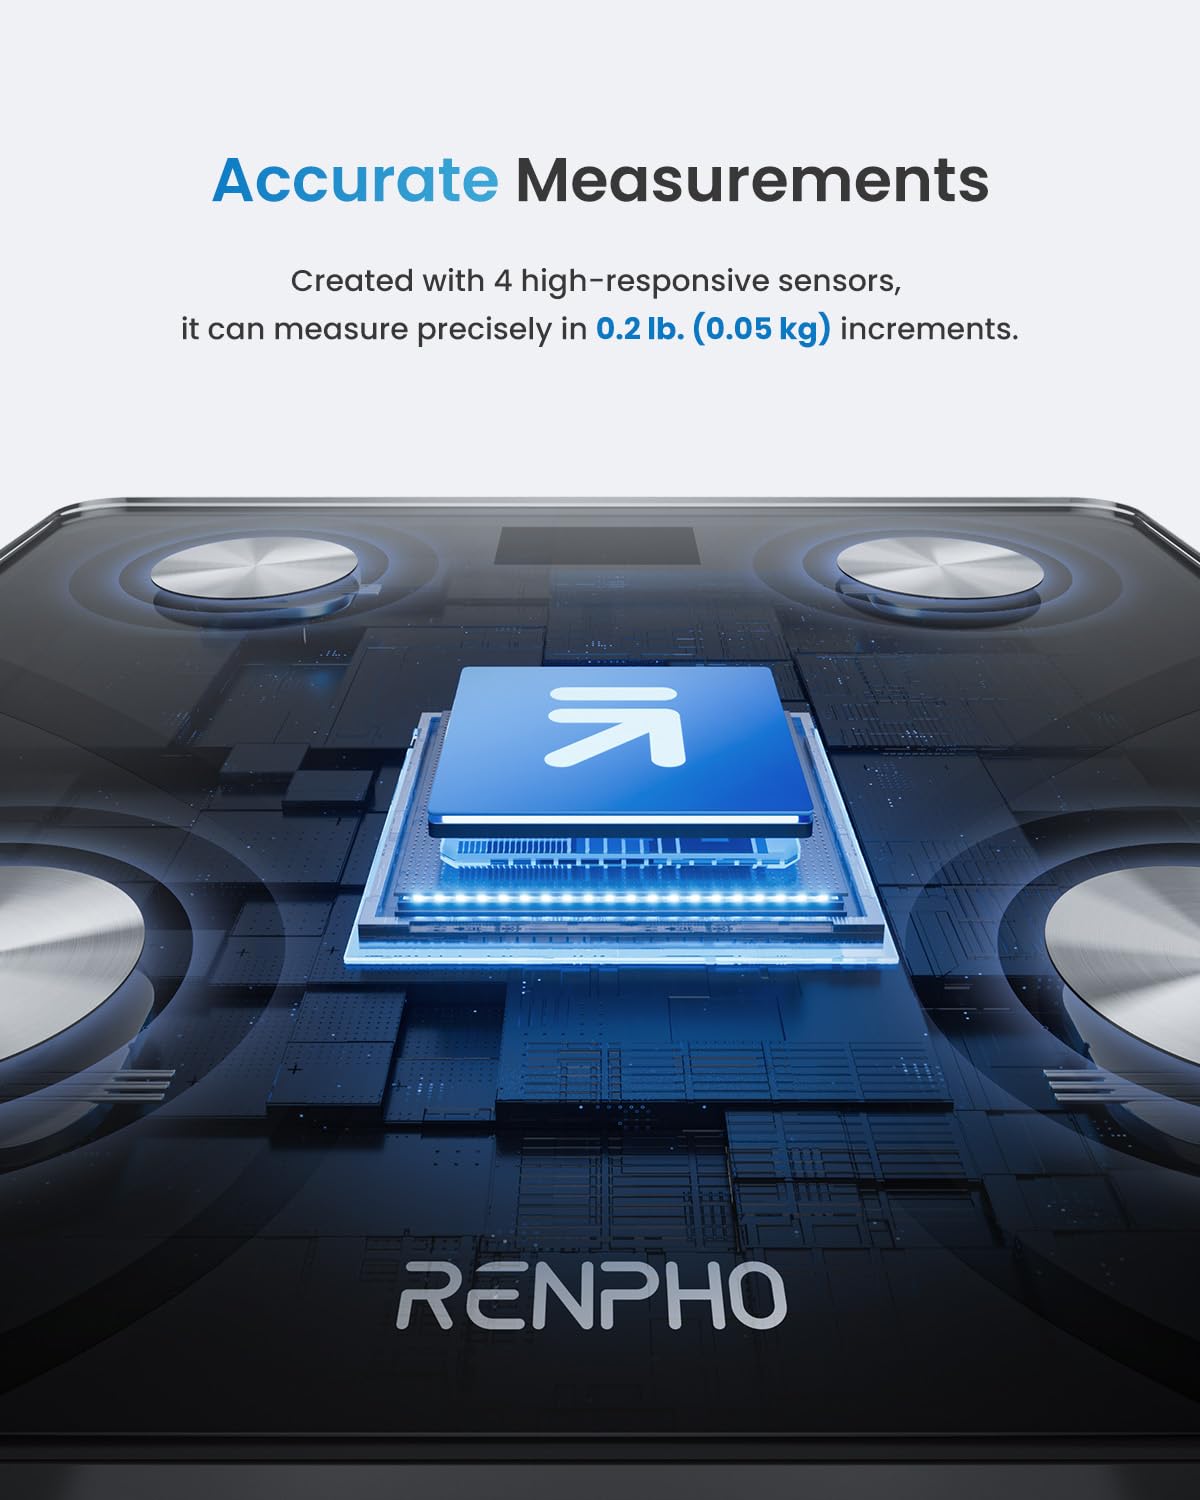 A close-up view of a Renpho Elis 1 Smart Body Scale with a blue illuminated display showing a simple upward arrow and BMI readings. The text emphasizes the scale's precision, with 4 high-responsive sensors.